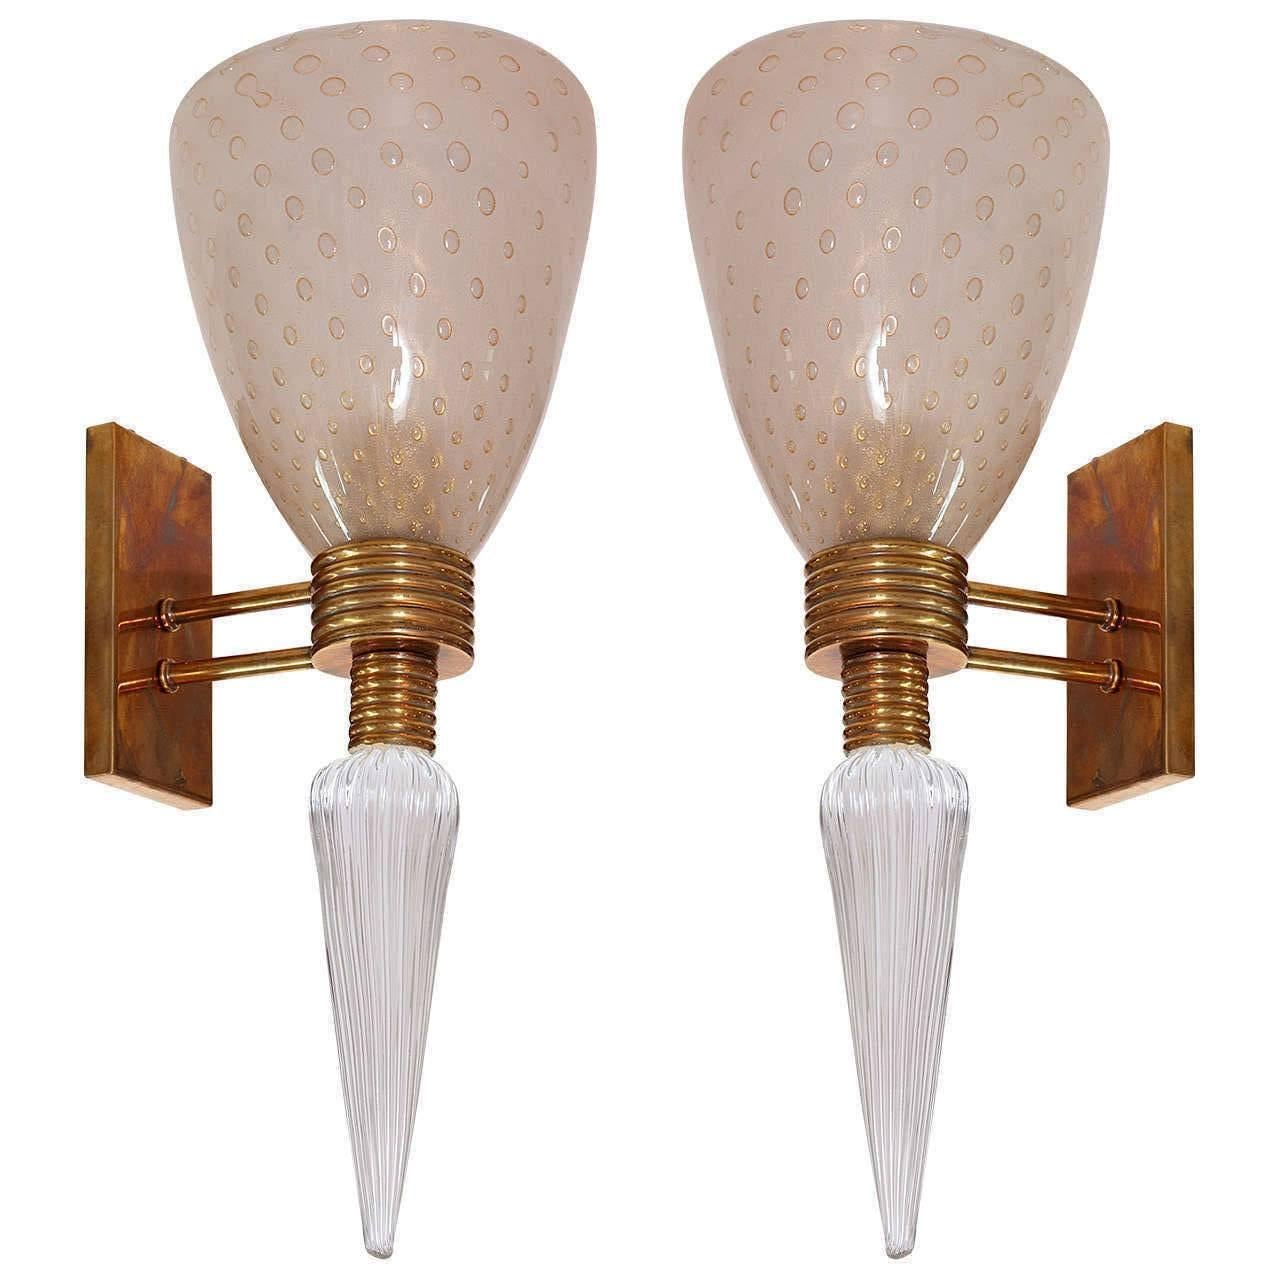 Pair of Murano opaline sconces with controlled bubbles and inverted teardrop finials, circa 1940s.